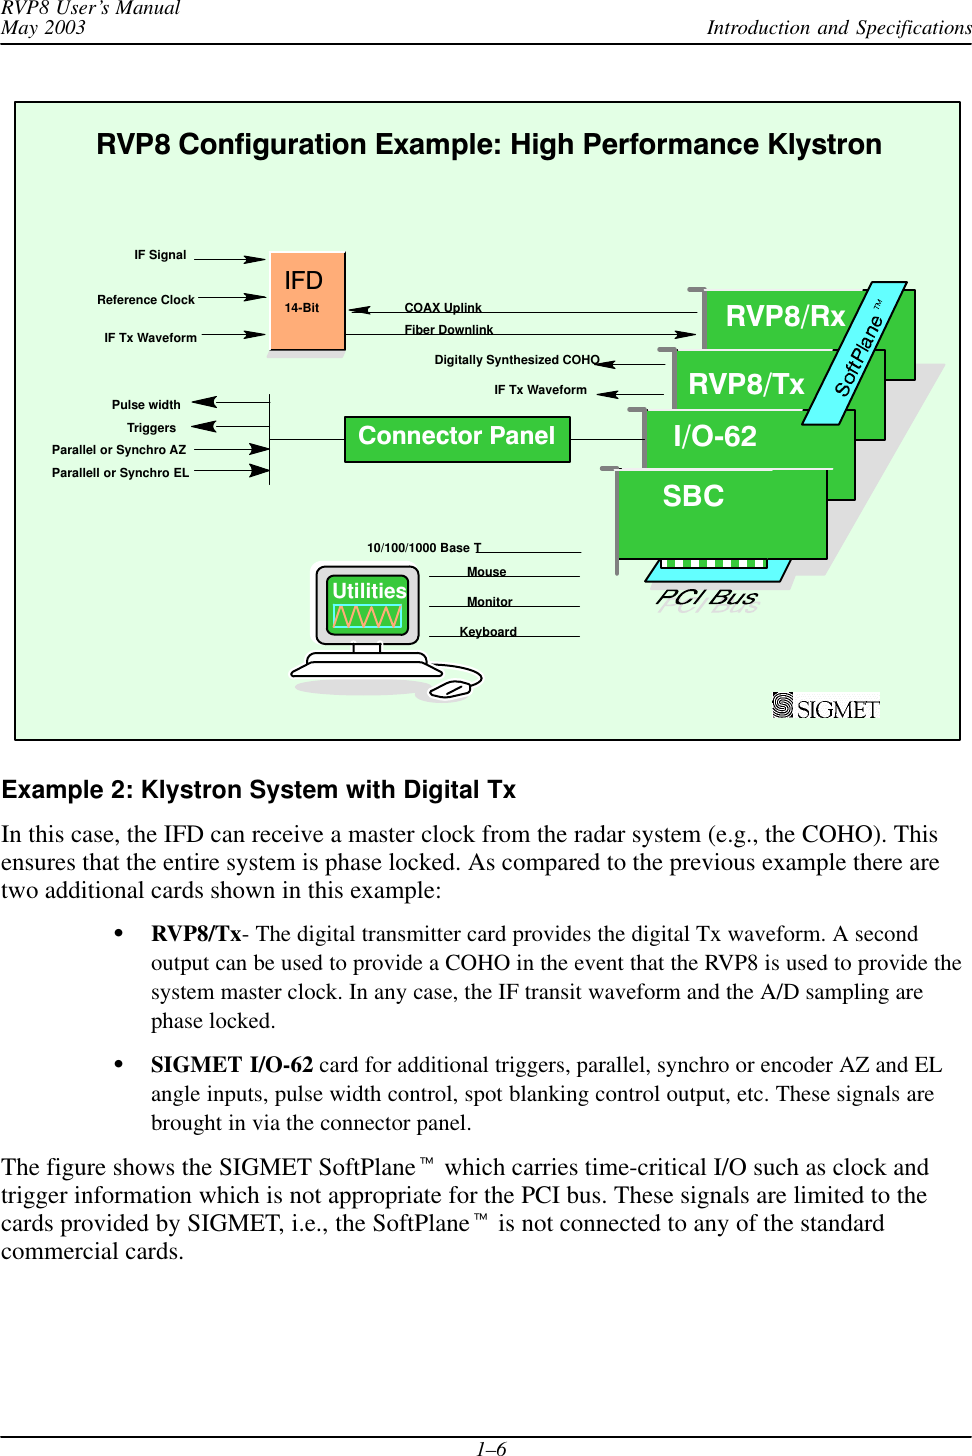 Introduction and SpecificationsRVP8 User’s ManualMay 20031–6RVP8 Configuration Example: High Performance KlystronKeyboardMouseMonitor10/100/1000 Base TIFDFiber DownlinkCOAX UplinkTriggersIF SignalReference ClockDigitally Synthesized COHOParallel or Synchro AZParallell or Synchro ELPulse width IF Tx WaveformUtilitiesIF Tx Waveform14-BitI/O62SBCRVP8/TxRVP8/RxConnector PanelExample 2: Klystron System with Digital TxIn this case, the IFD can receive a master clock from the radar system (e.g., the COHO). Thisensures that the entire system is phase locked. As compared to the previous example there aretwo additional cards shown in this example:RVP8/Tx- The digital transmitter card provides the digital Tx waveform. A secondoutput can be used to provide a COHO in the event that the RVP8 is used to provide thesystem master clock. In any case, the IF transit waveform and the A/D sampling arephase locked.SIGMET I/O-62 card for additional triggers, parallel, synchro or encoder AZ and ELangle inputs, pulse width control, spot blanking control output, etc. These signals arebrought in via the connector panel.The figure shows the SIGMET SoftPlane which carries time-critical I/O such as clock andtrigger information which is not appropriate for the PCI bus. These signals are limited to thecards provided by SIGMET, i.e., the SoftPlane is not connected to any of the standardcommercial cards.